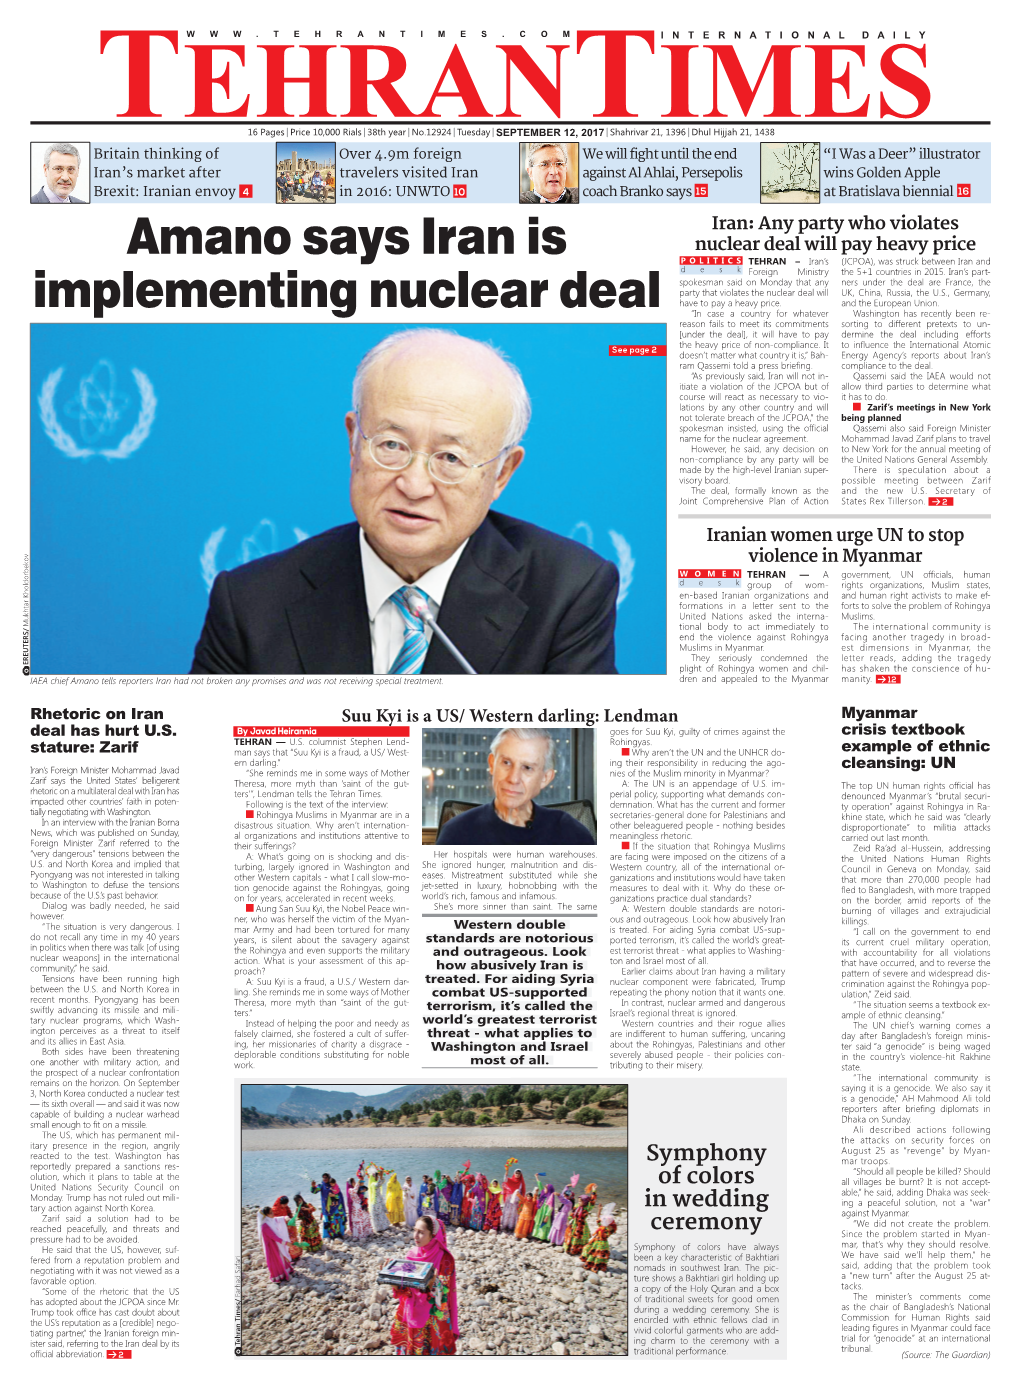 Amano Says Iran Is Implementing Nuclear Deal